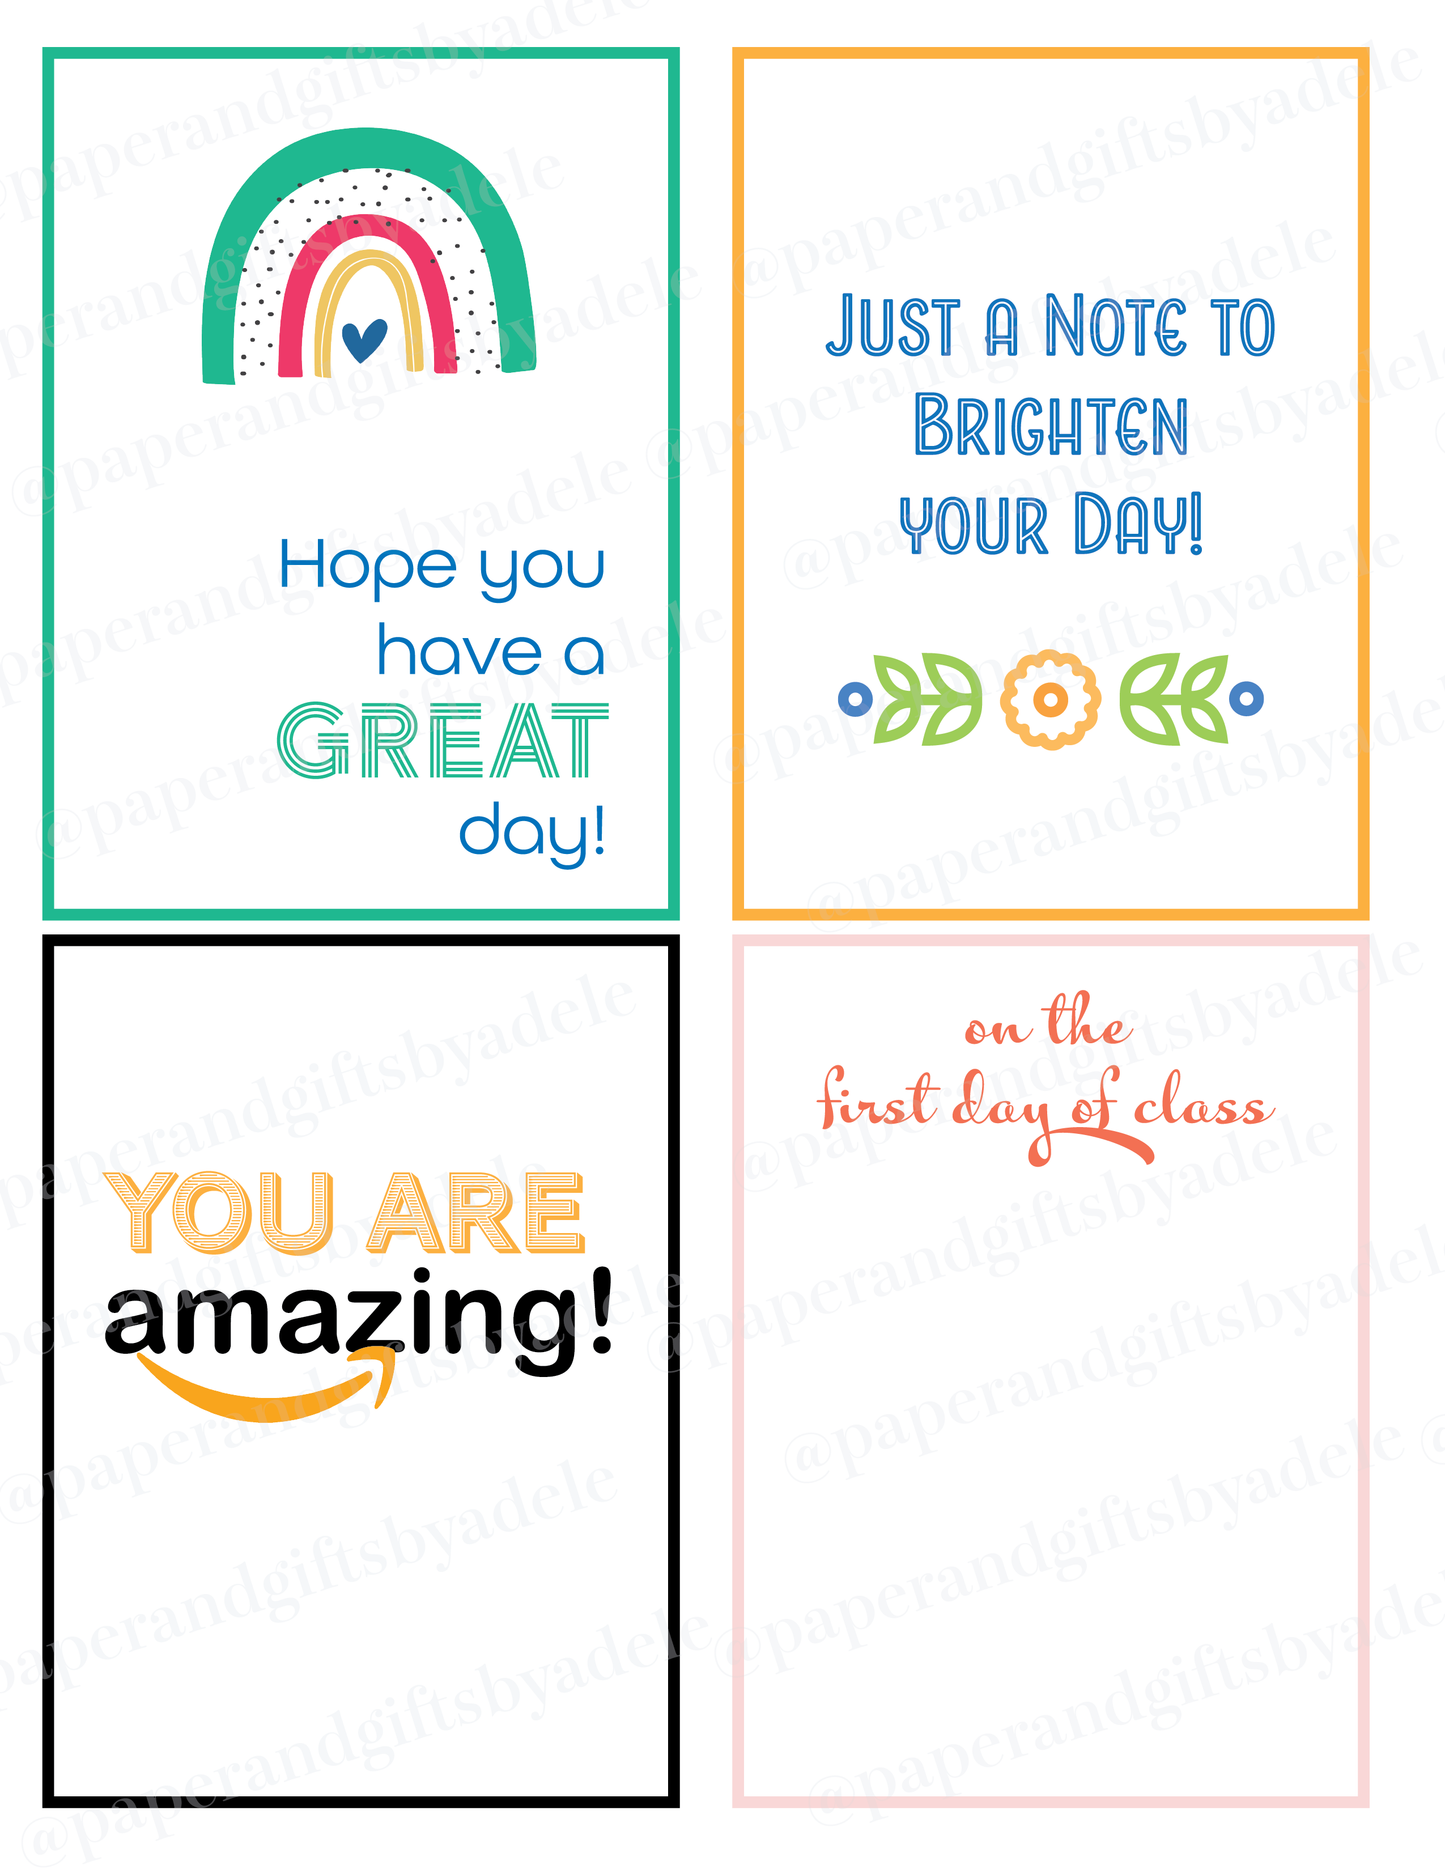 Printables - Encouragement Cards for Students or Teachers